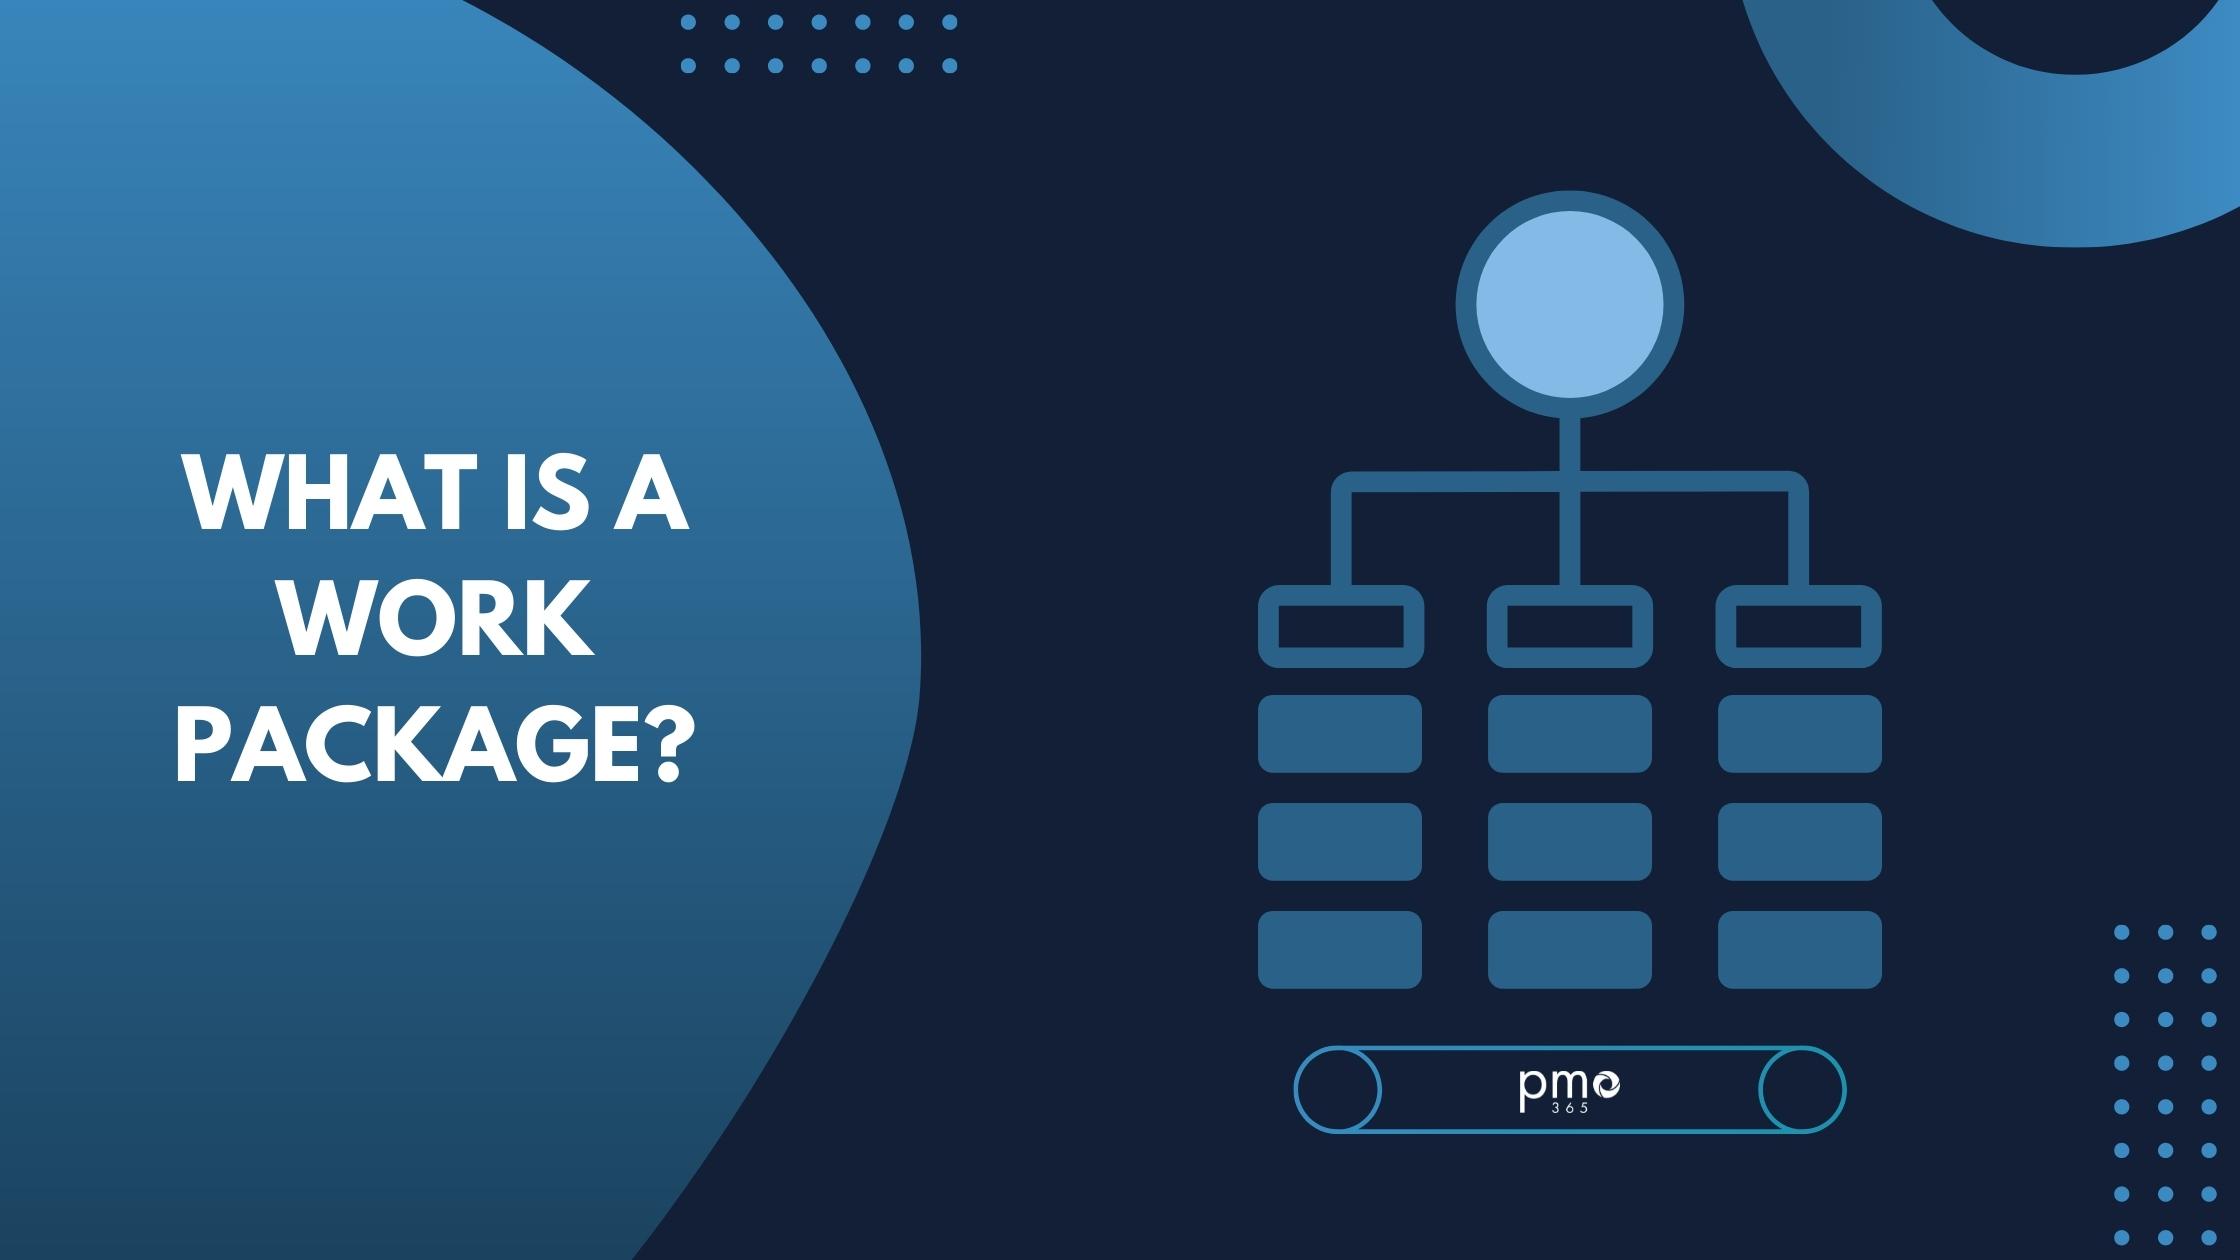 What is a Work Package?